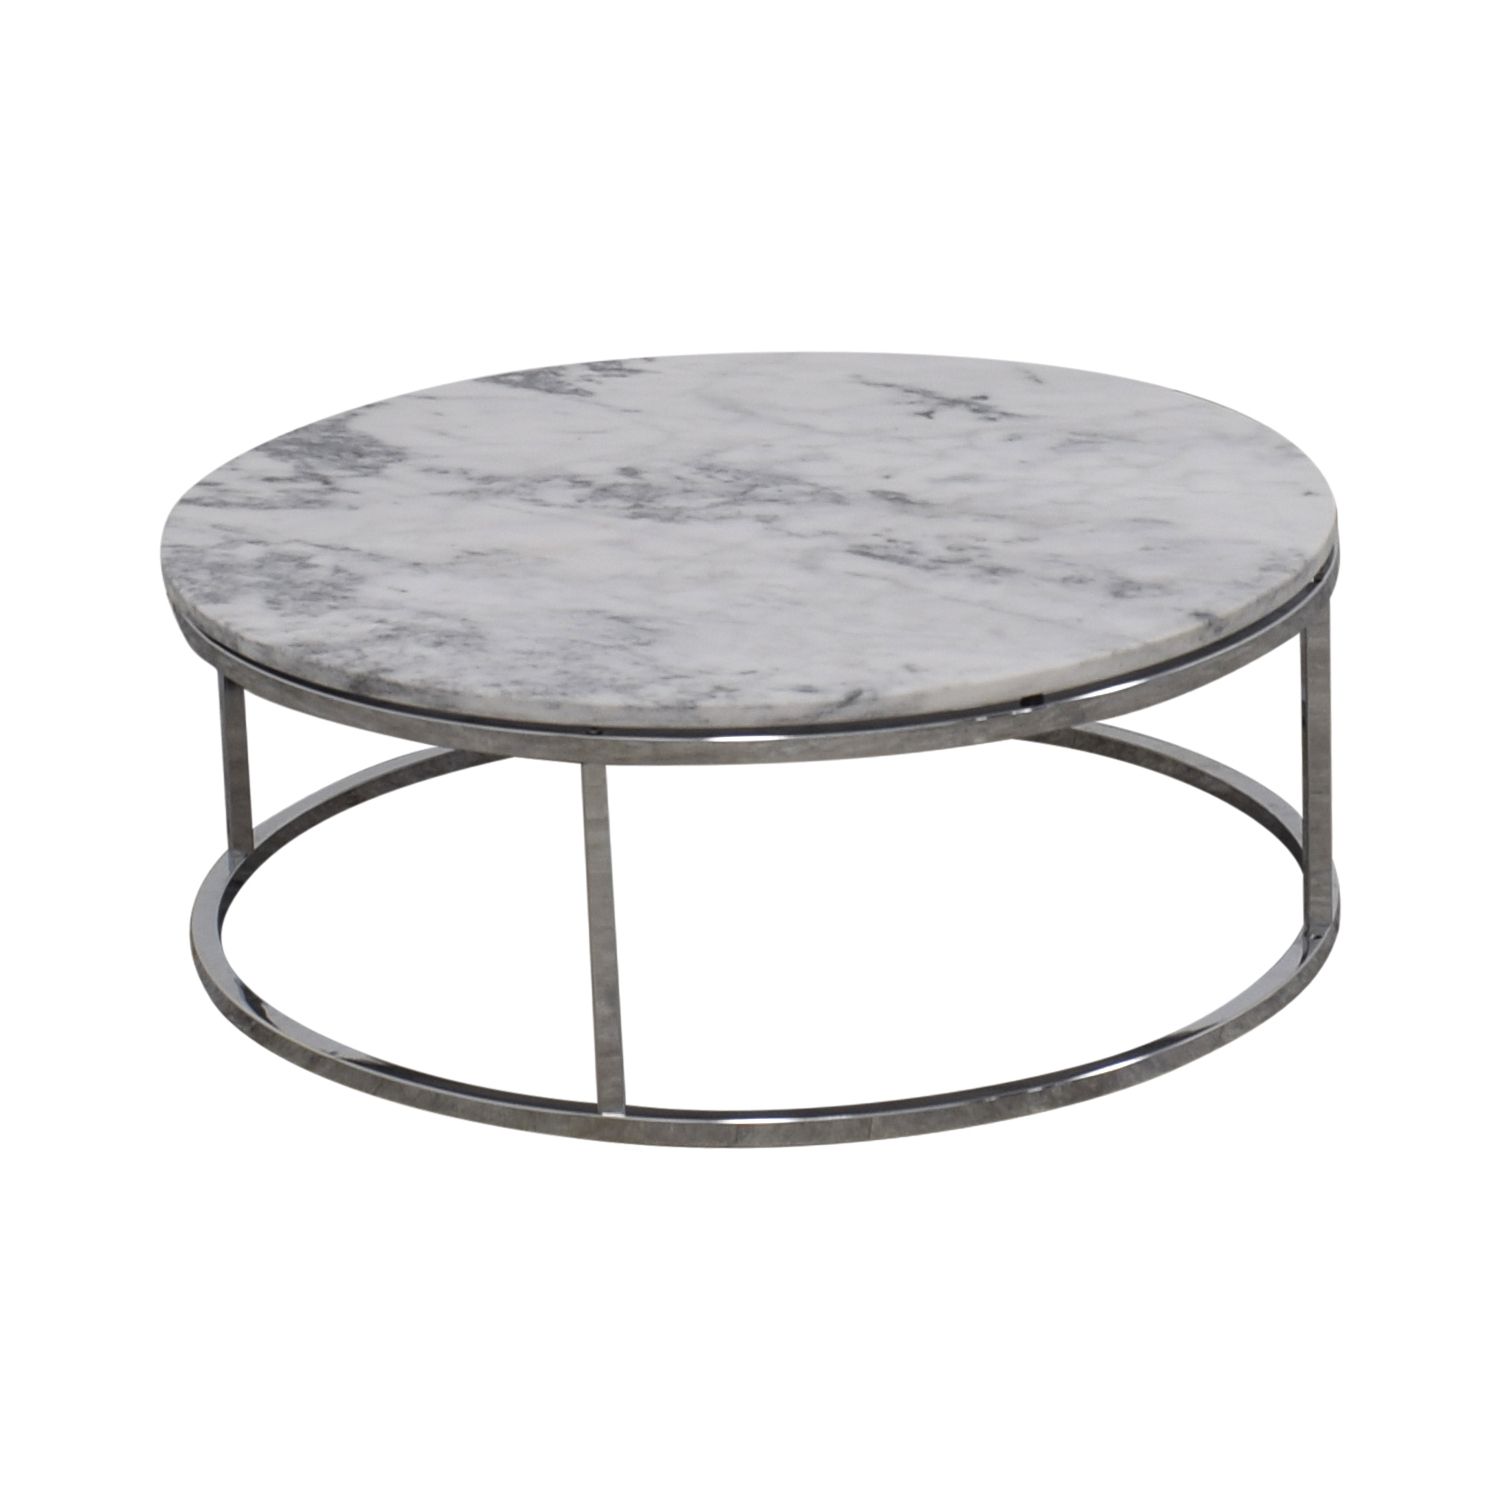 [%popular Marble And White Coffee Tables Pertaining To 57% Off – Cb2 Cb2 Round White Marble Coffee Table / Tables|57% Off – Cb2 Cb2 Round White Marble Coffee Table / Tables Throughout Widely Used Marble And White Coffee Tables%] (View 4 of 20)